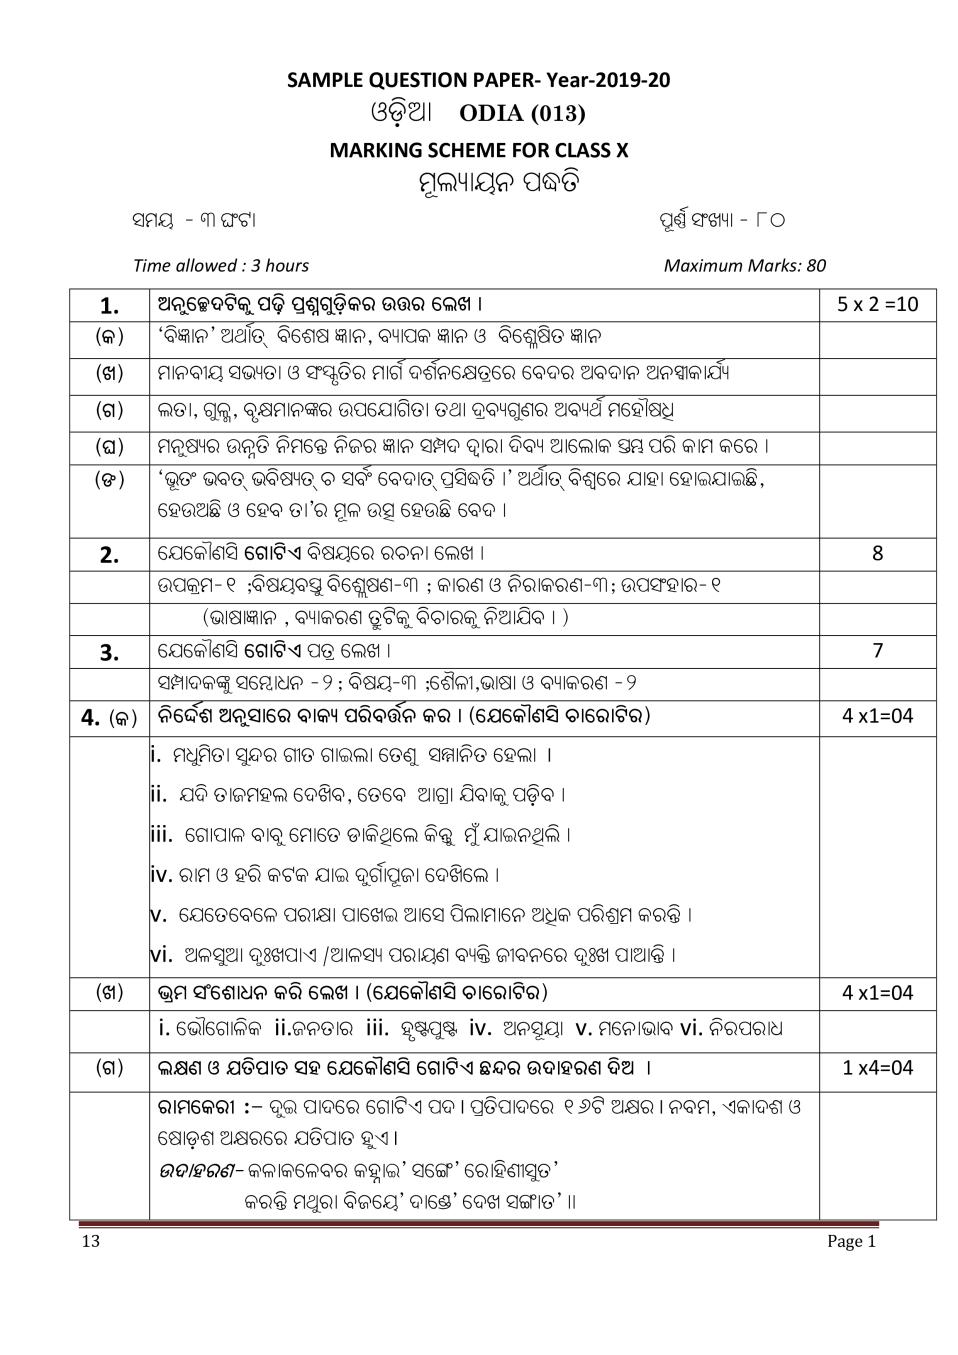 CBSE Class 10 Marking Scheme 2020 for Odia - Page 1